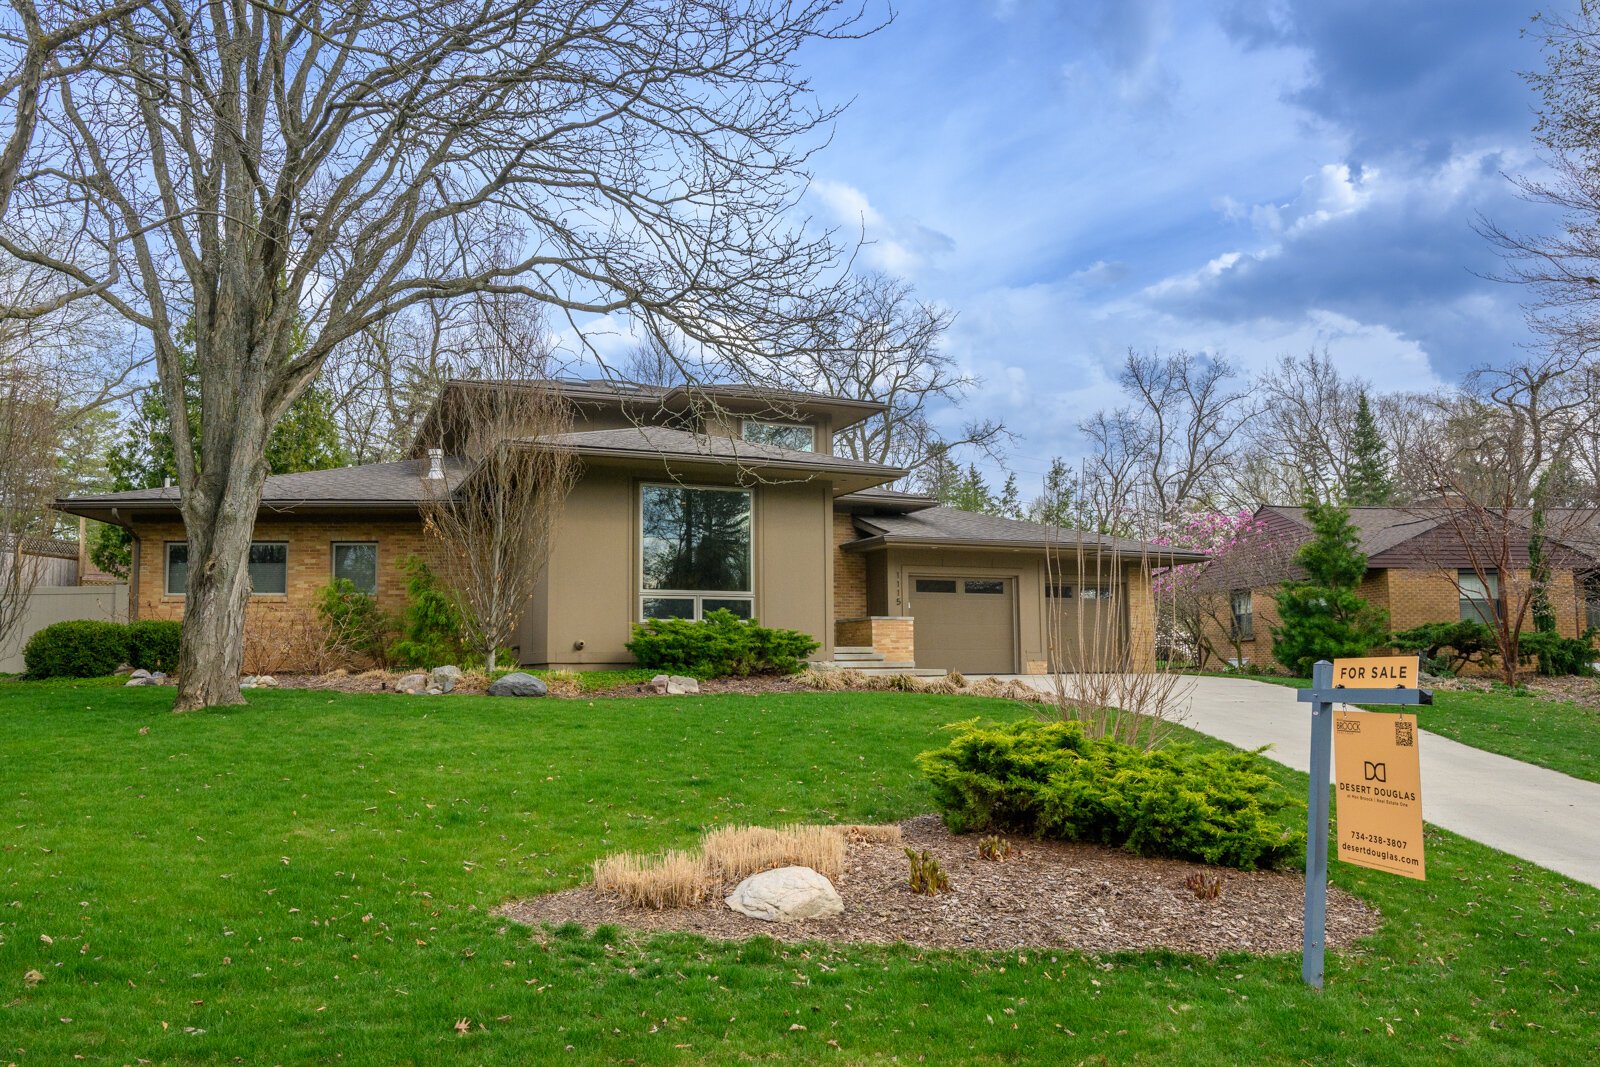 A home for sale in Ann Arbor's Water Hill Neighborhood.